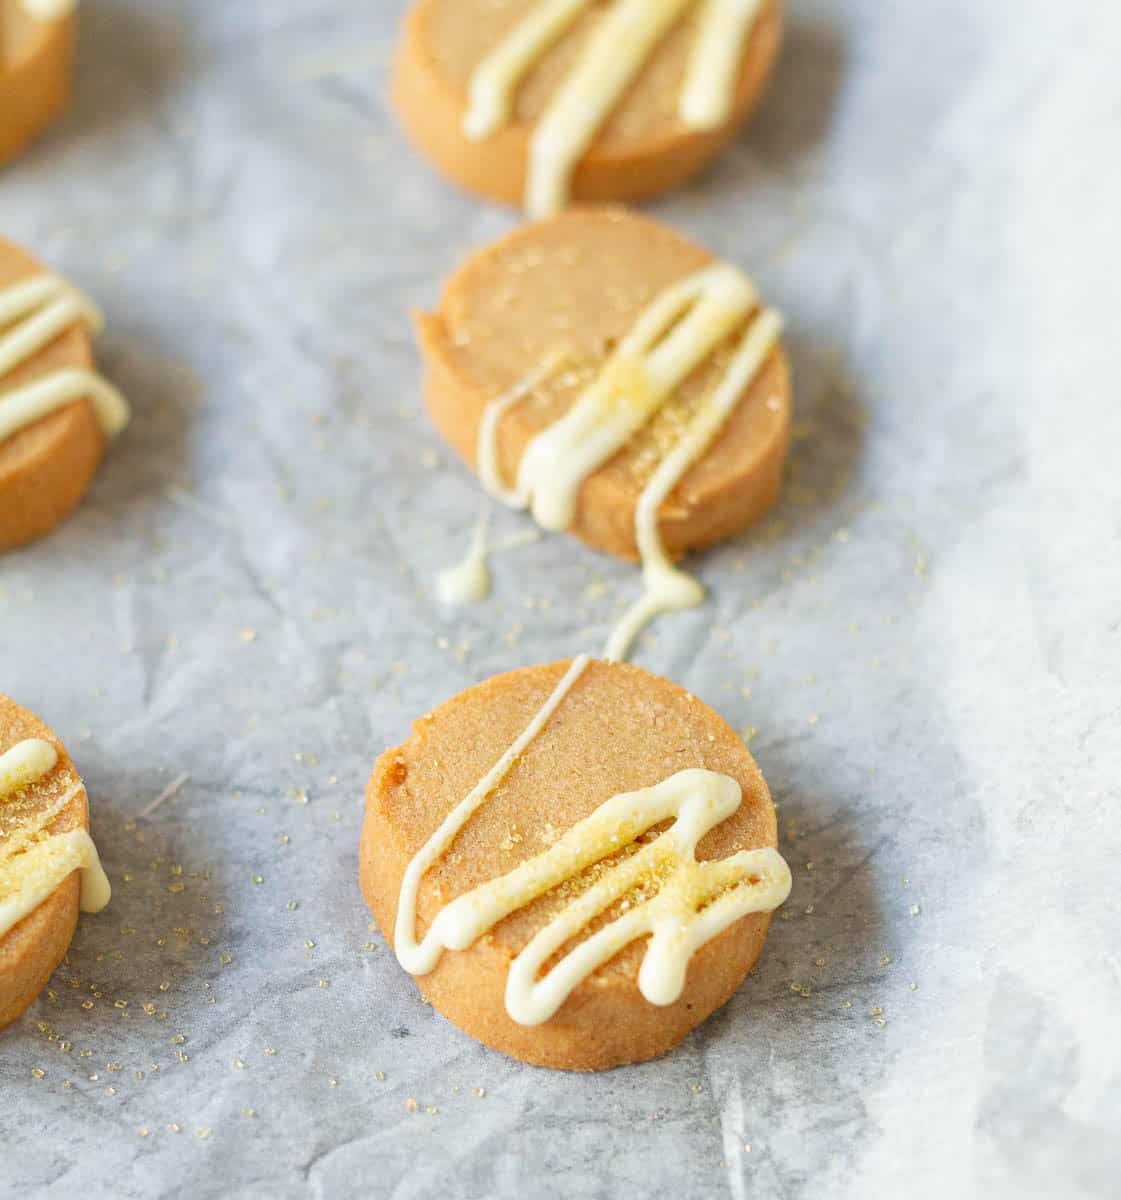 Drizzle the cookies with melted white chocolate and sugar sprinkles